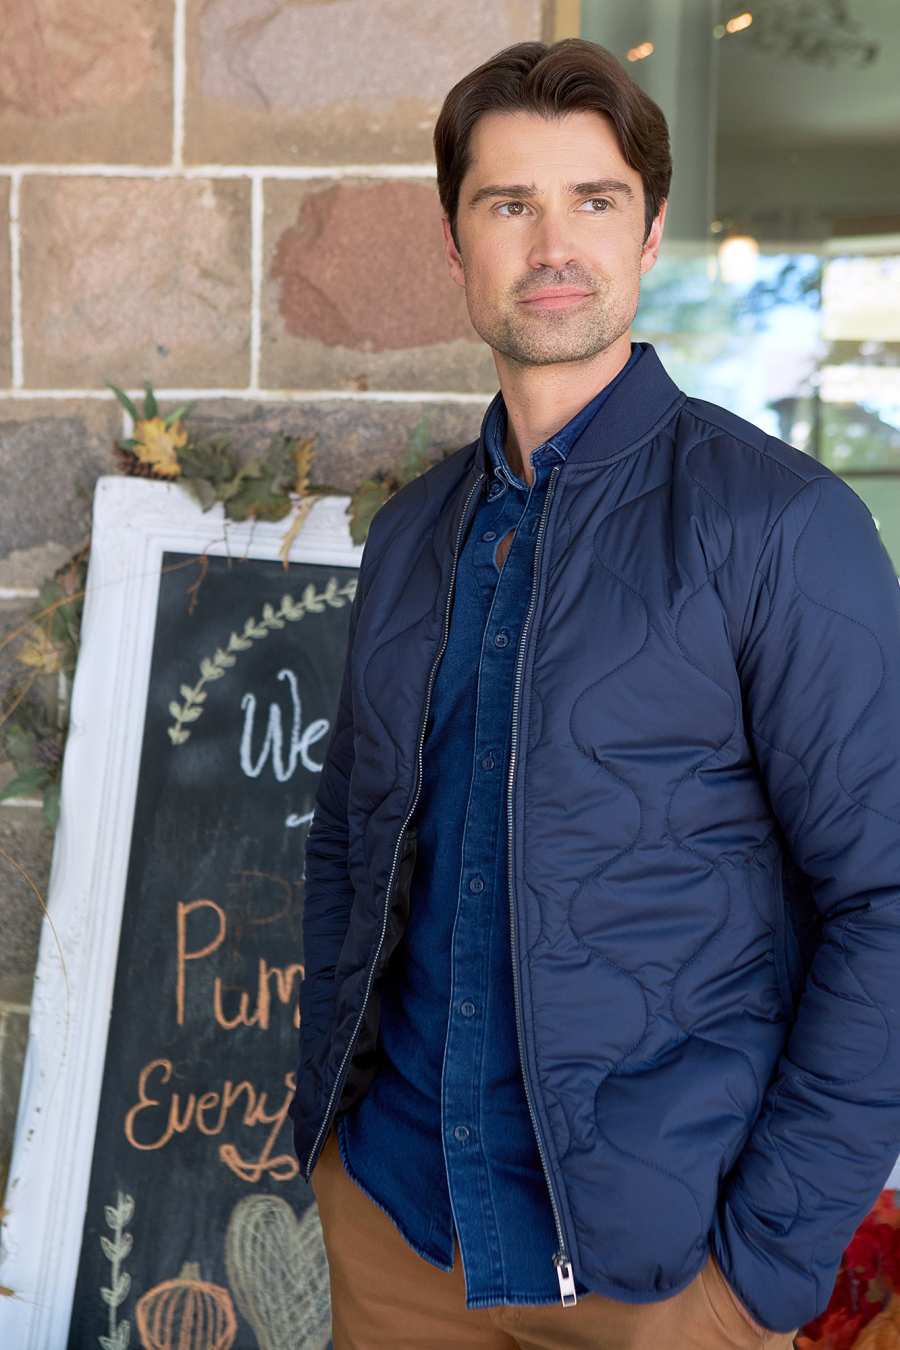 Who Is Hallmark Channel’s Corey Sevier? 5 Things to Know About the ‘Pumpkin Everything’ Star 02